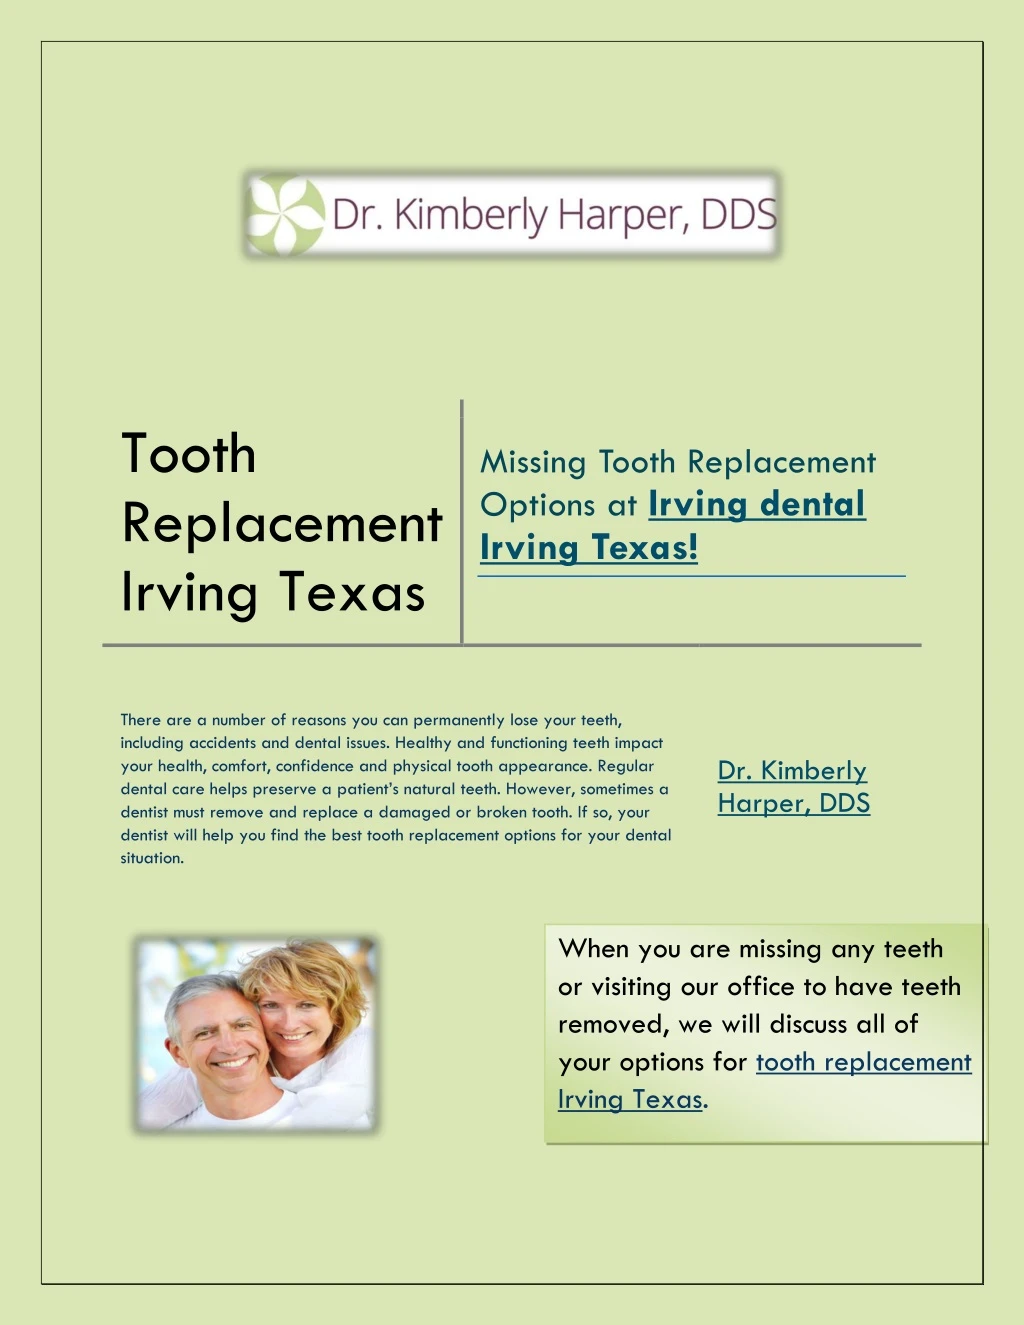 tooth replacement irving texas